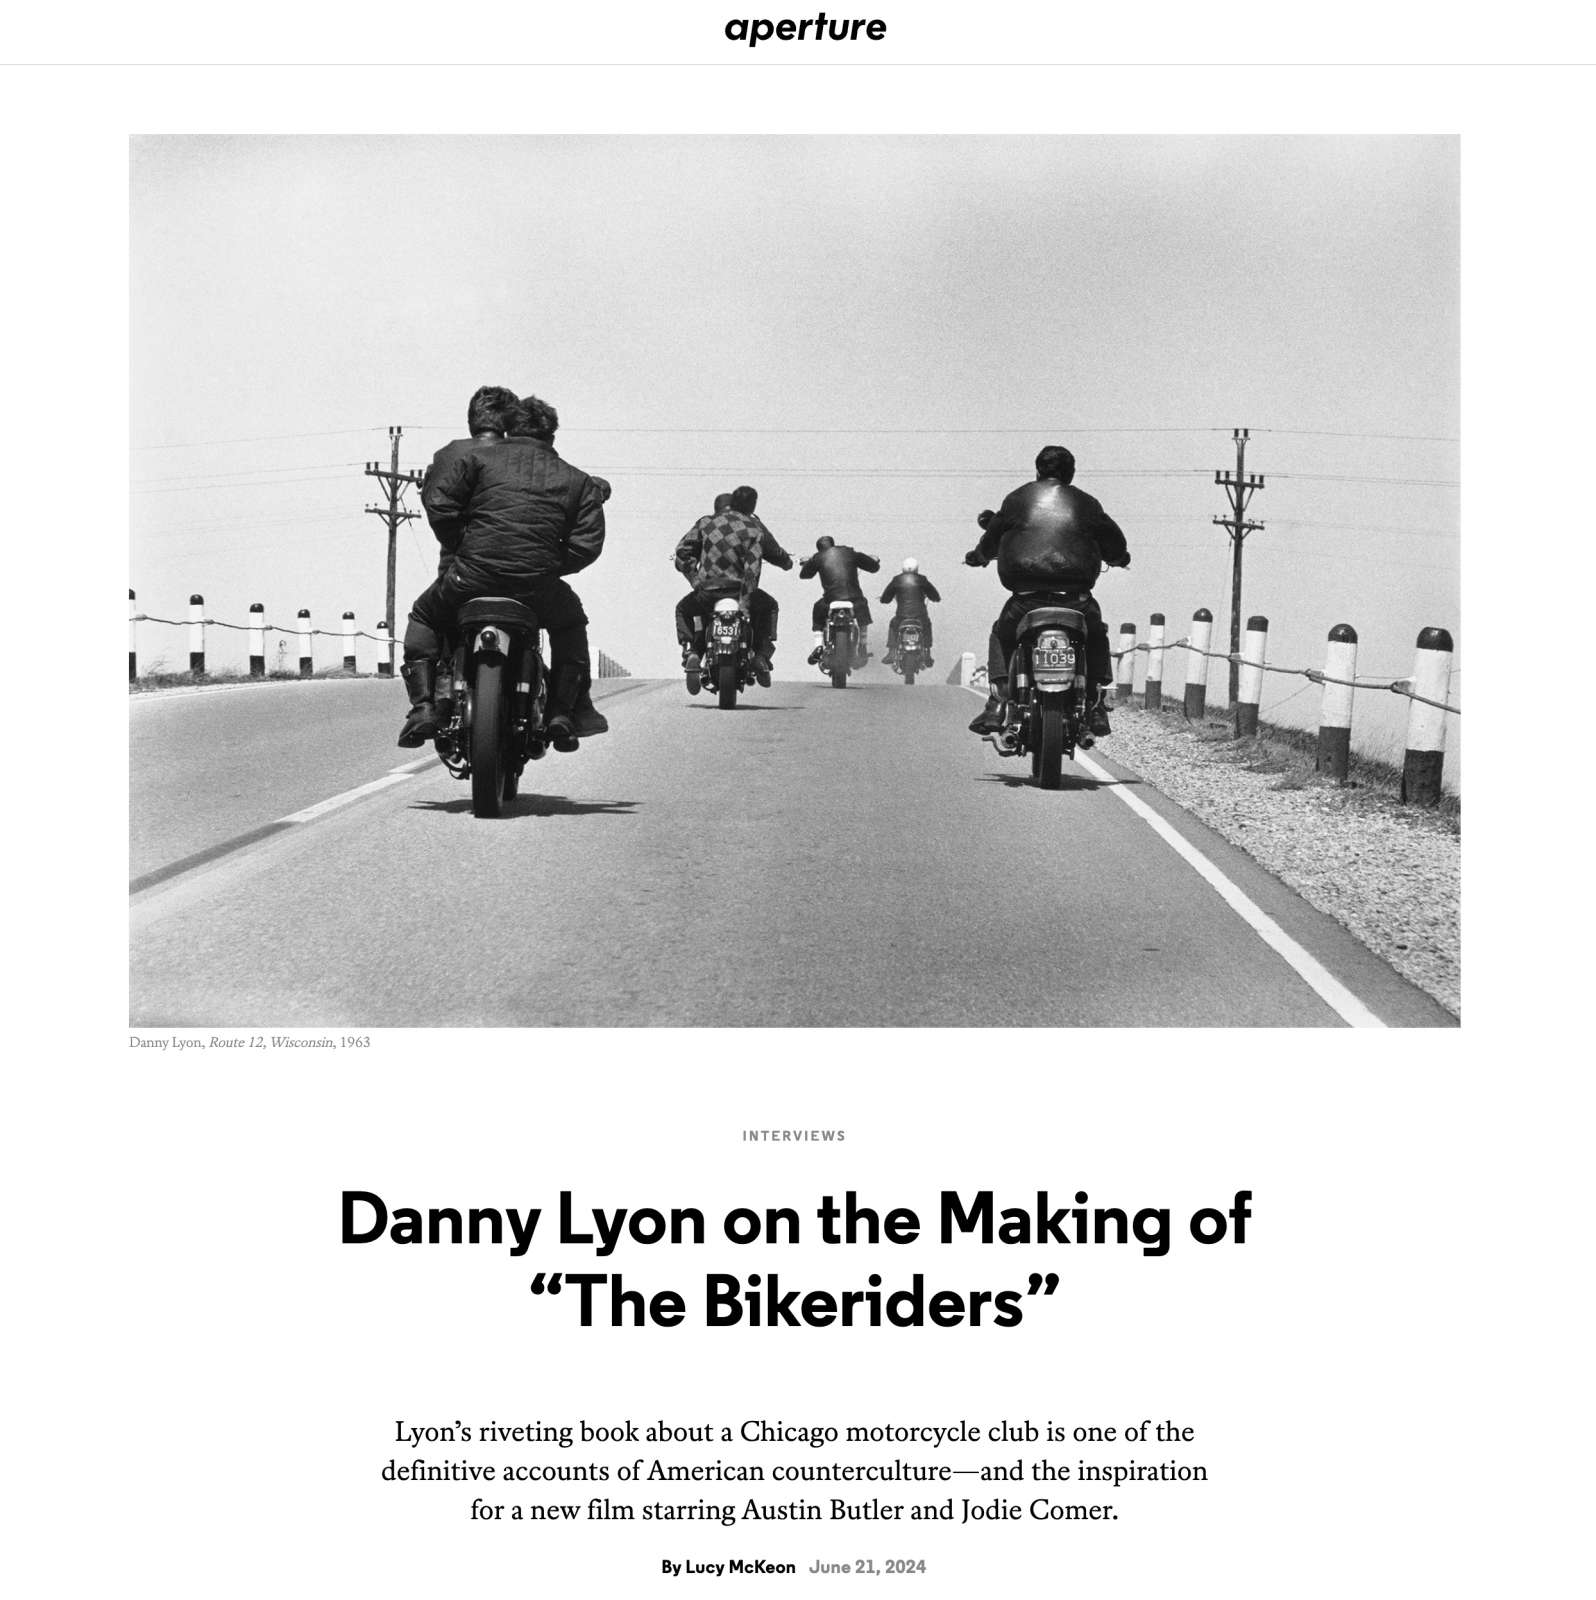 Danny Lyon on the Making of “The Bikeriders”